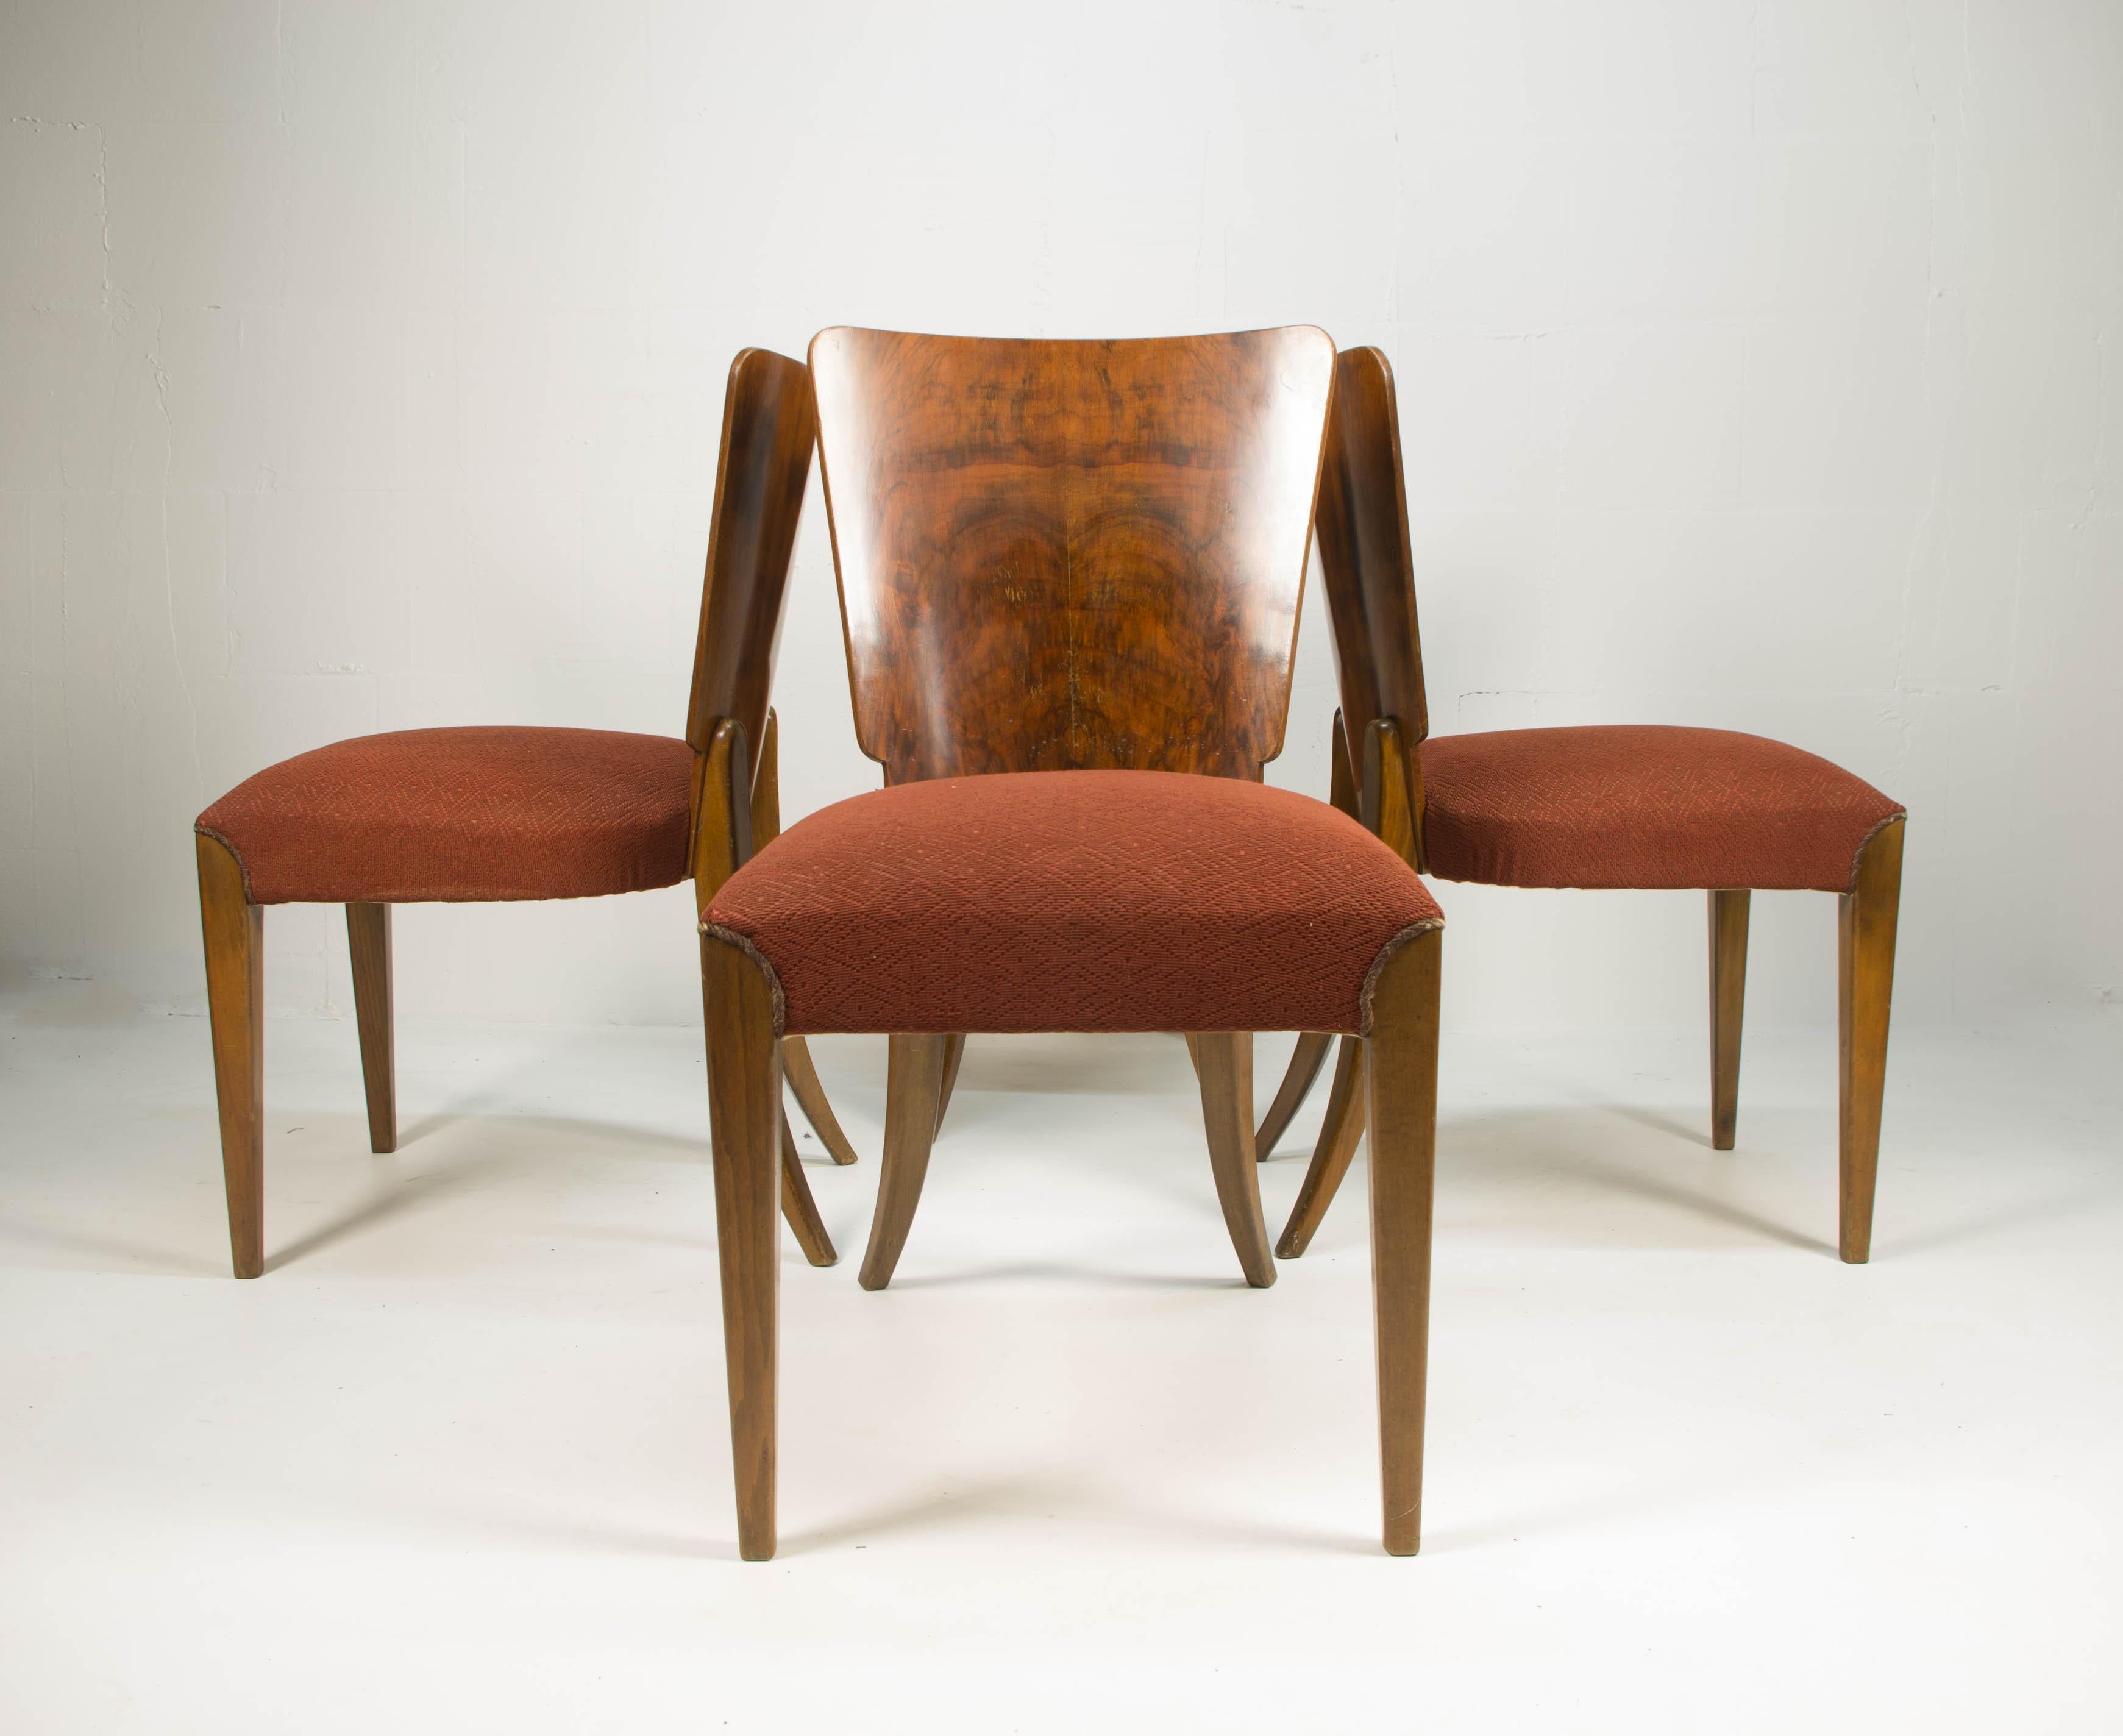 Set of four dining chairs, catalog number H-214, designed by Jindrich Halabala in the 1930s, manufactured in ÚP Závody in the 1950s. It features walnut veneer and original upholstery. The chairs are in very good original condition. The wooden parts